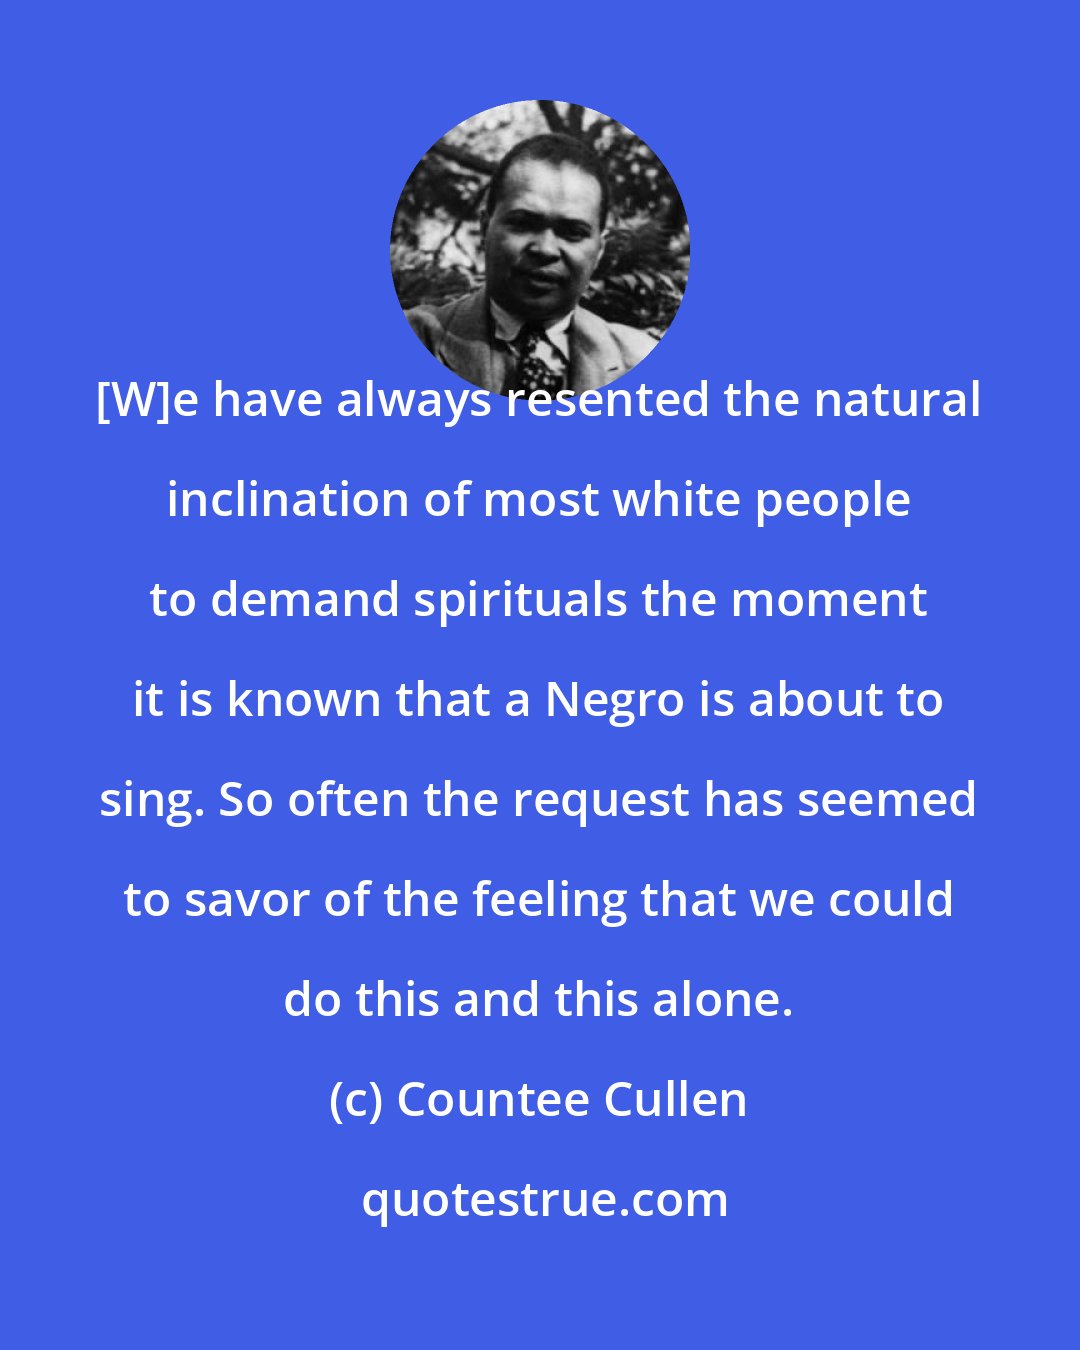 Countee Cullen: [W]e have always resented the natural inclination of most white people to demand spirituals the moment it is known that a Negro is about to sing. So often the request has seemed to savor of the feeling that we could do this and this alone.